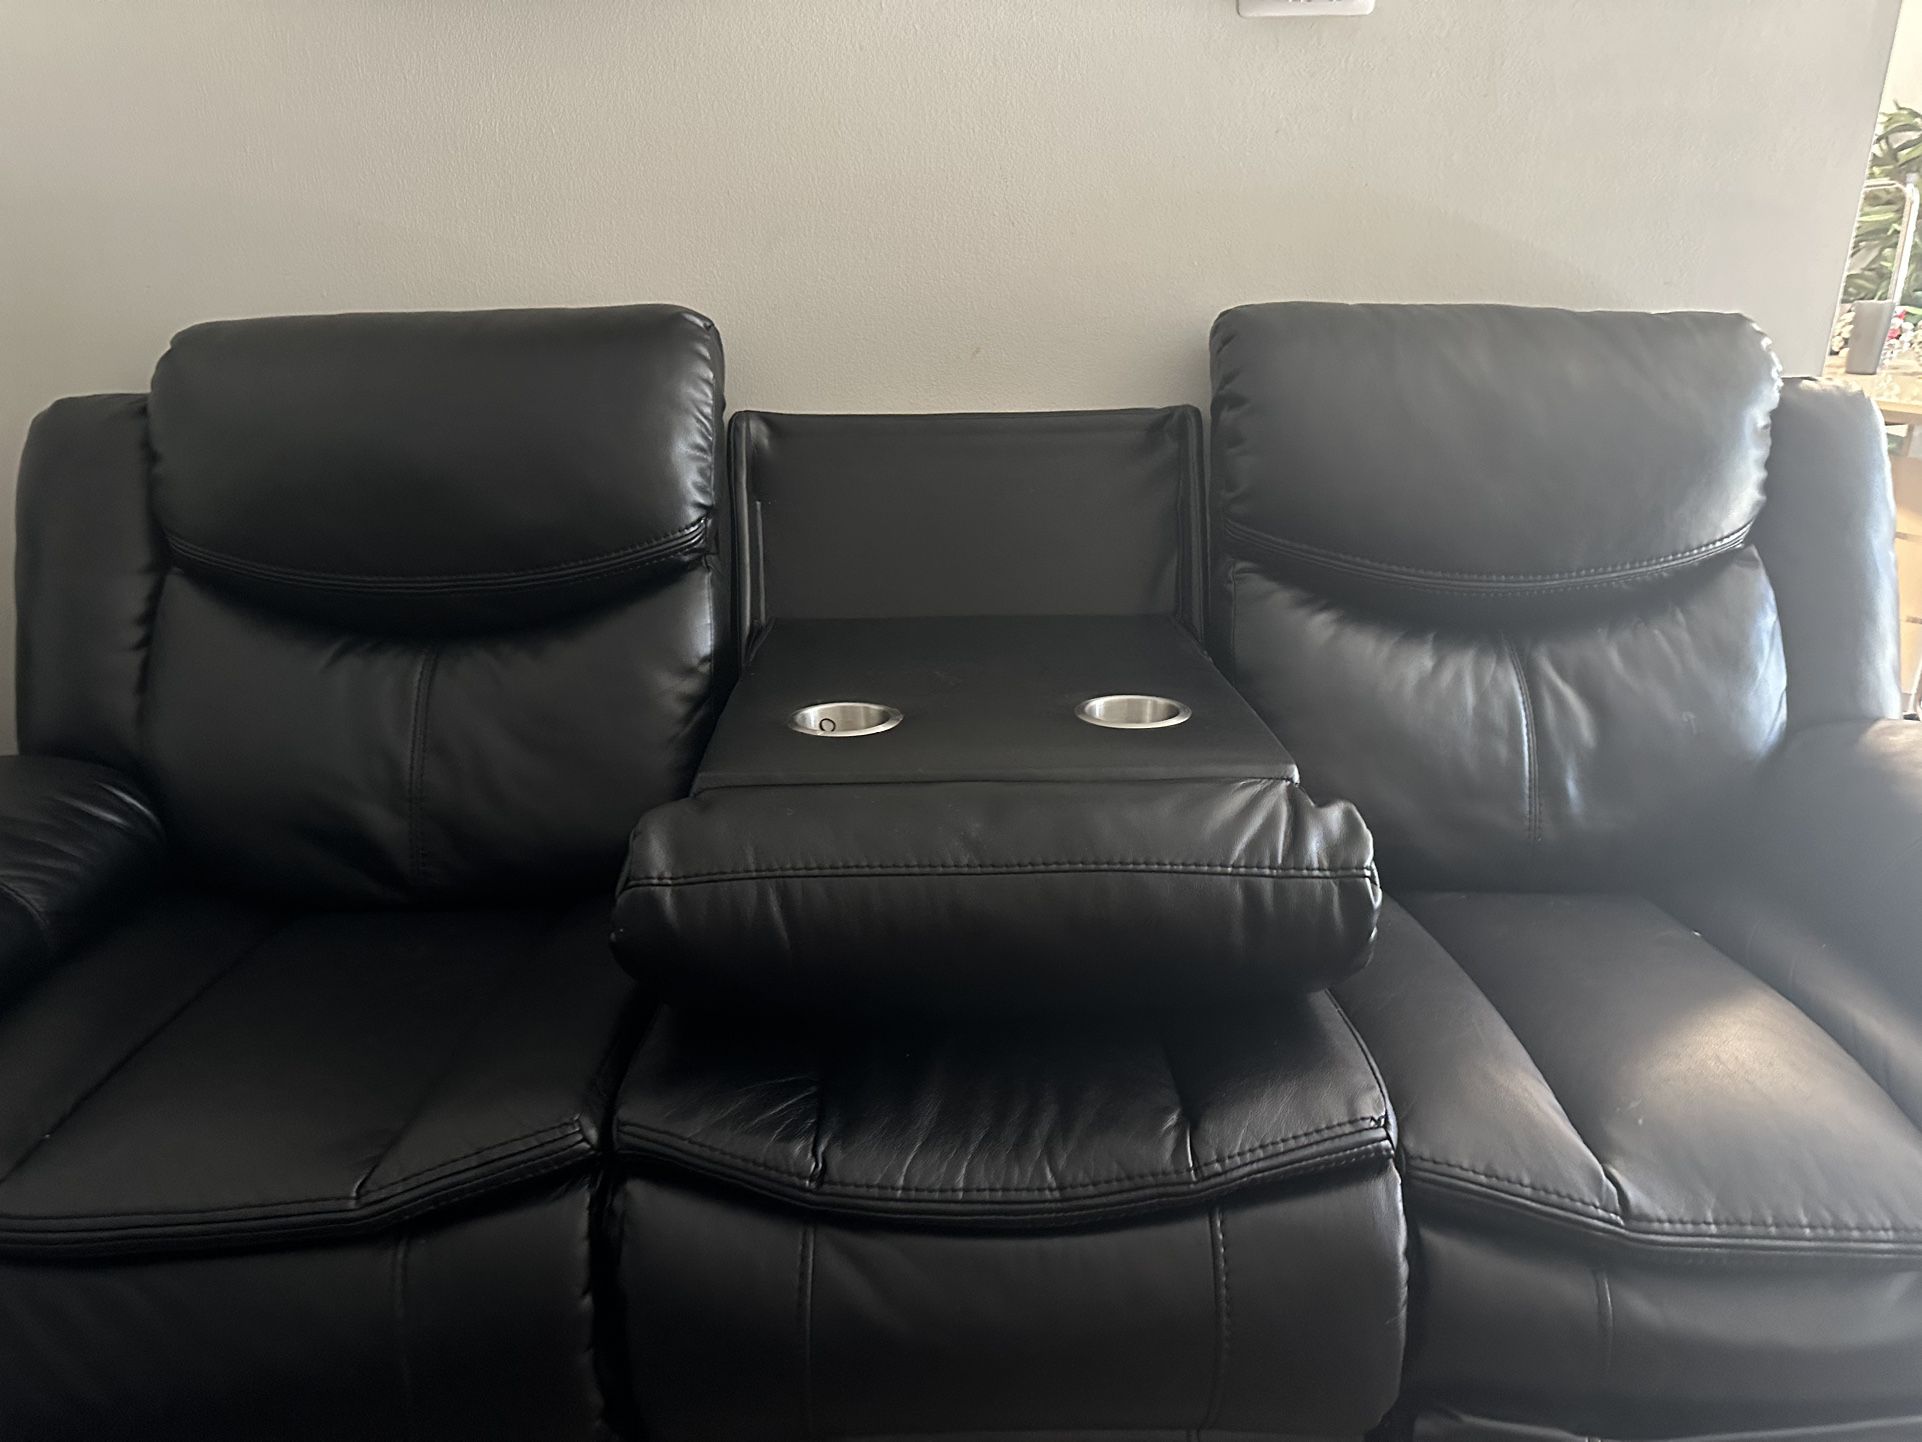 2 Piece Black Leather Recliner Sofa With Blue tooth Speaker